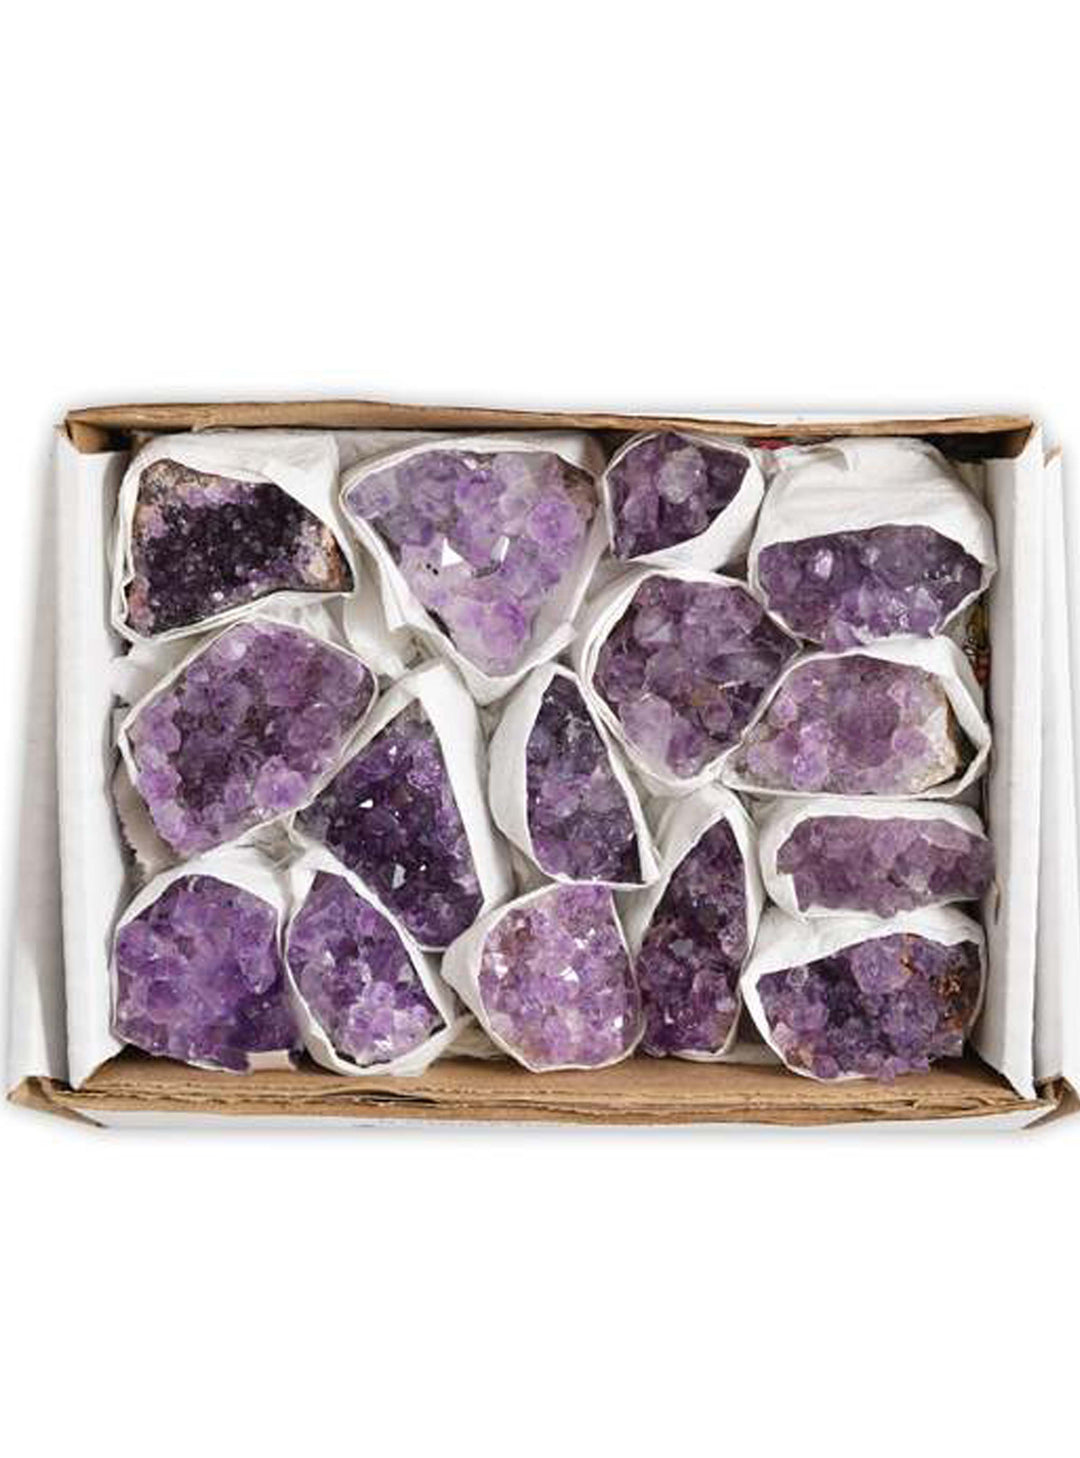 Small mineral specimens Amethyst approximately 2-4cm size